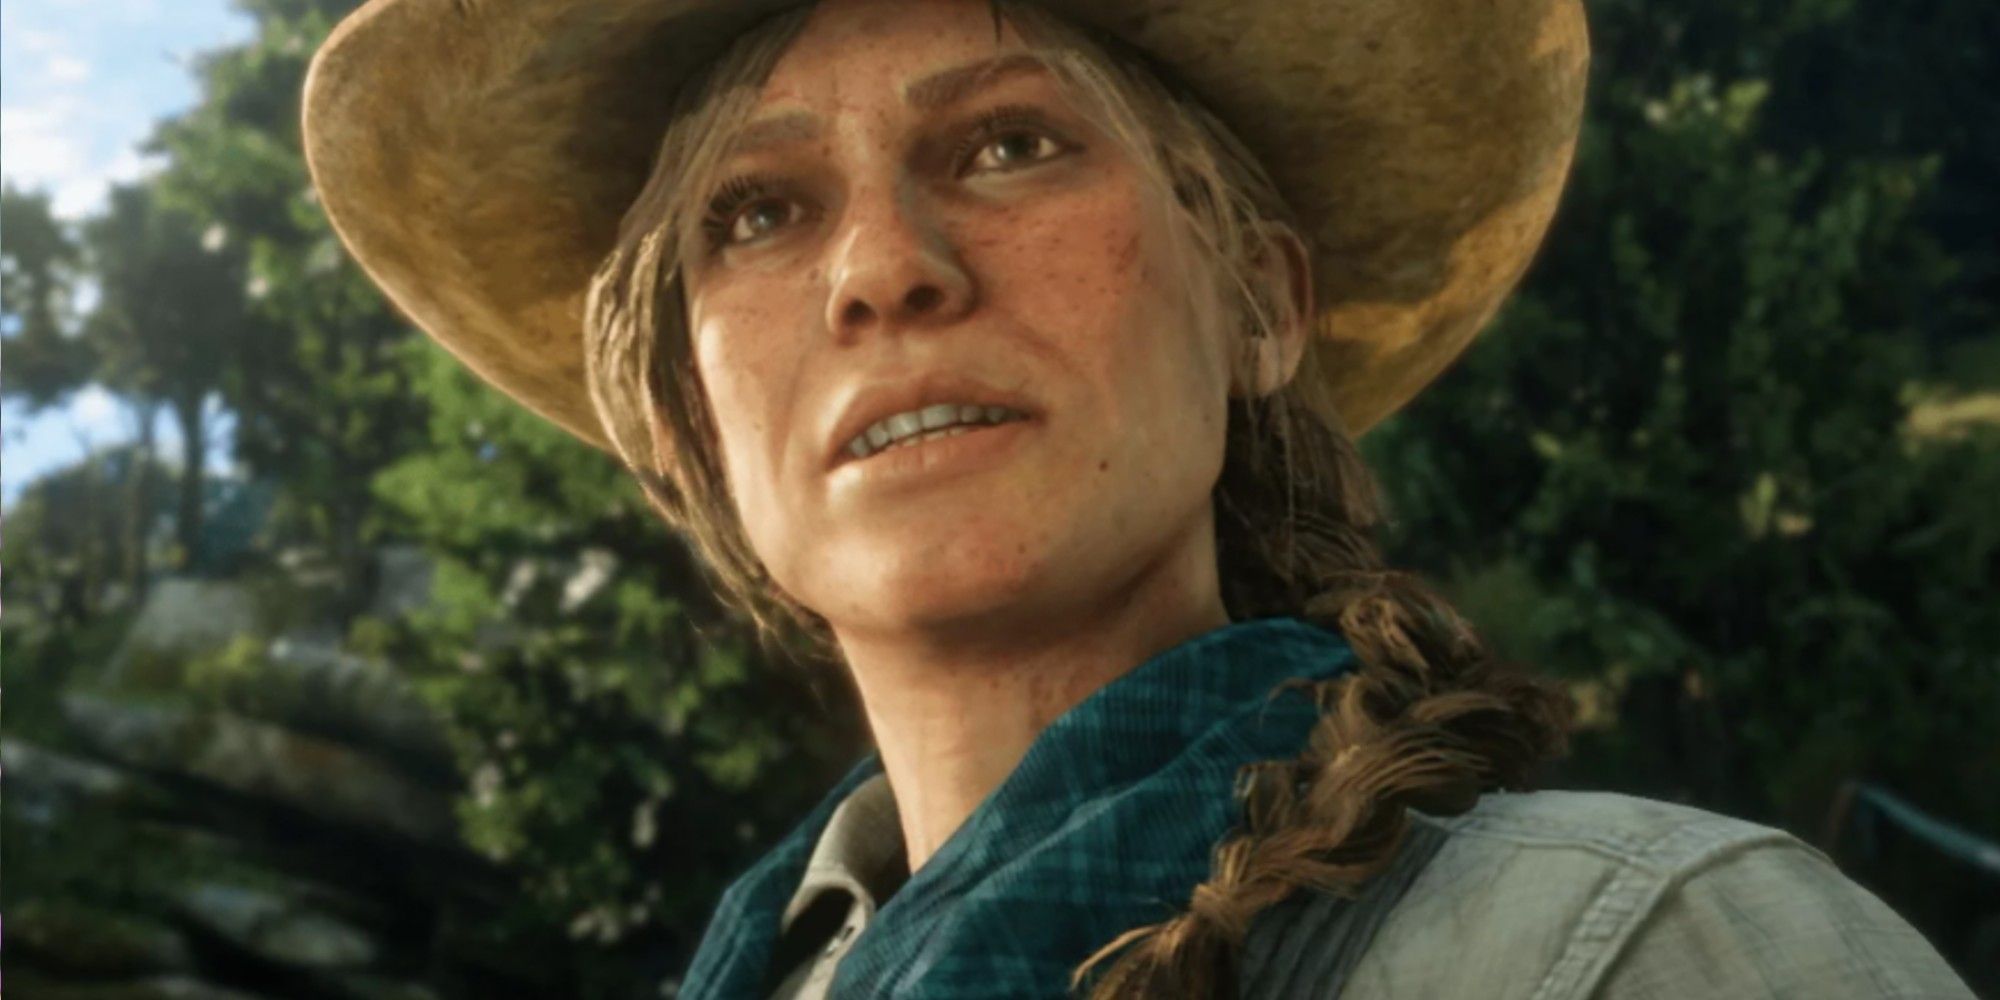 Sadie Adler agrees to help Arthur rather than side with Dutch in Red Dead Redemption 2